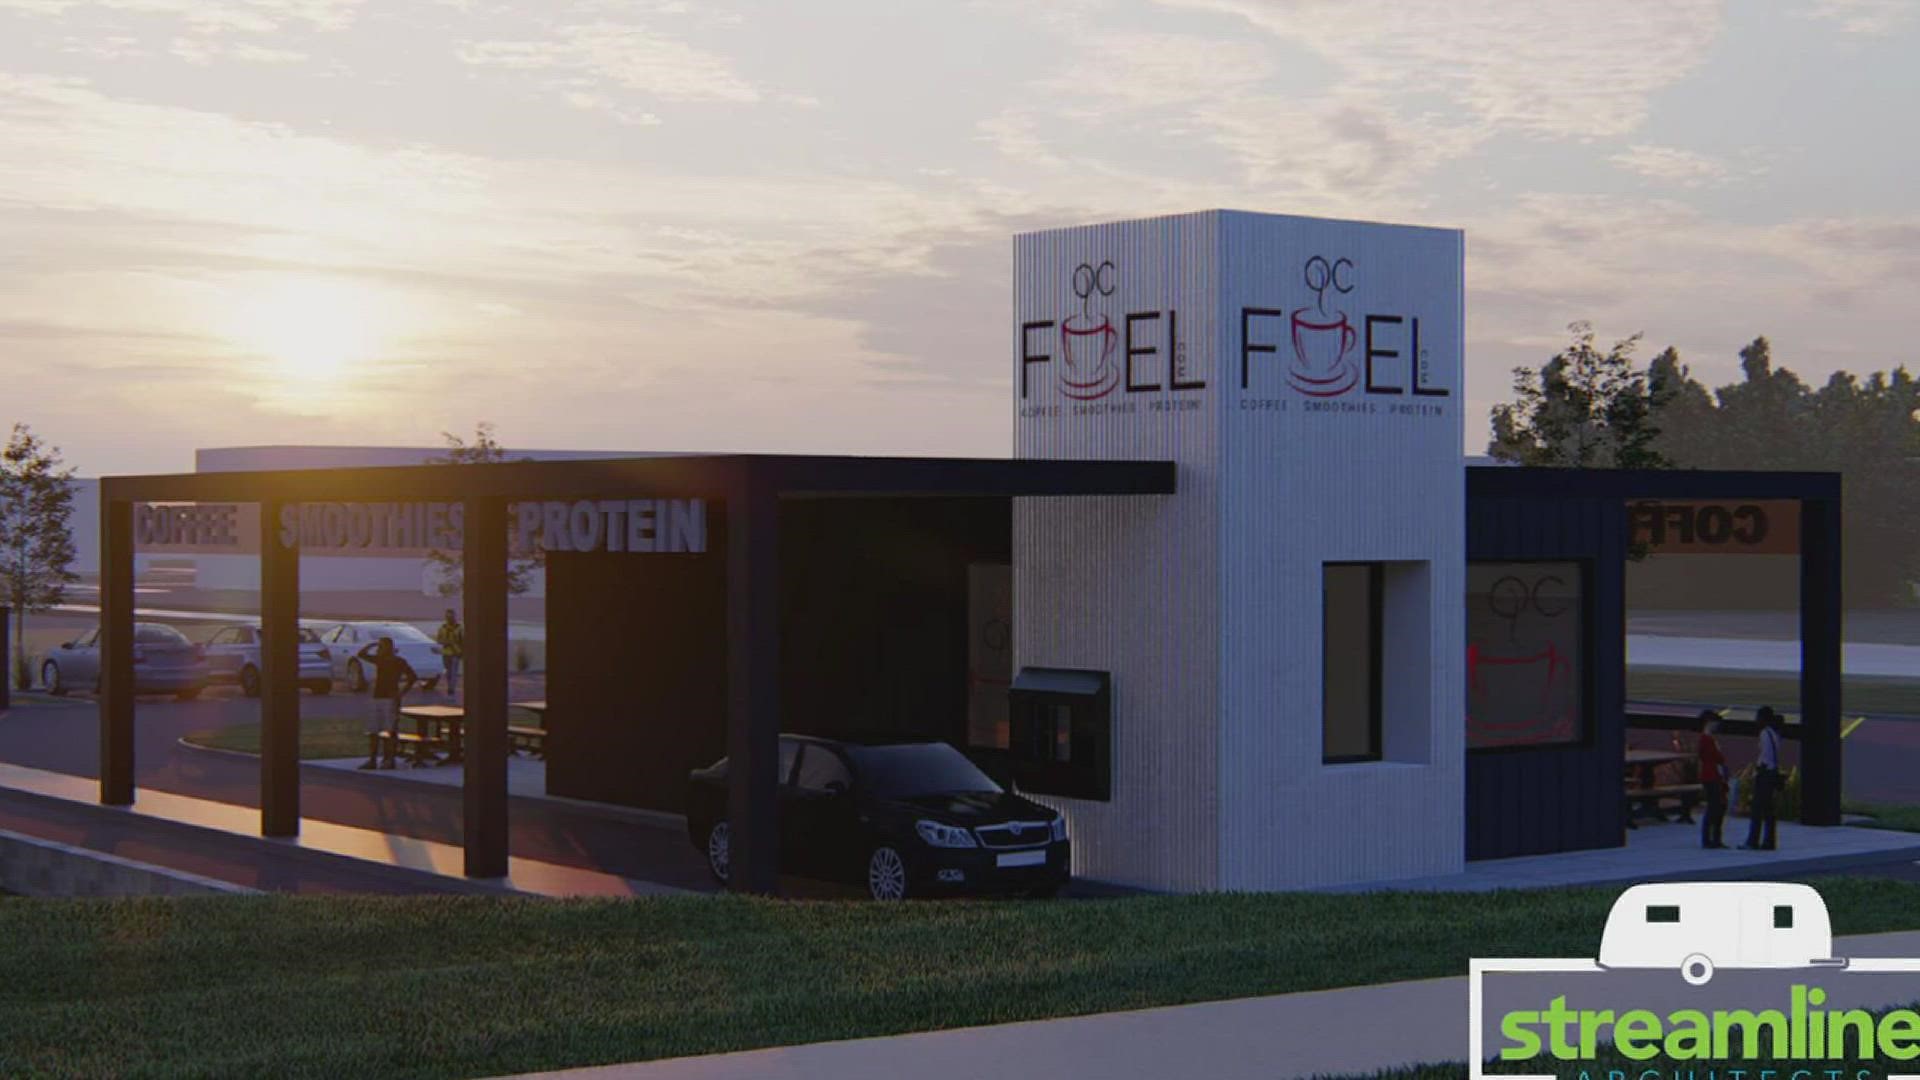 QC Fuel is opening its 4th location behind Bettendorf High School